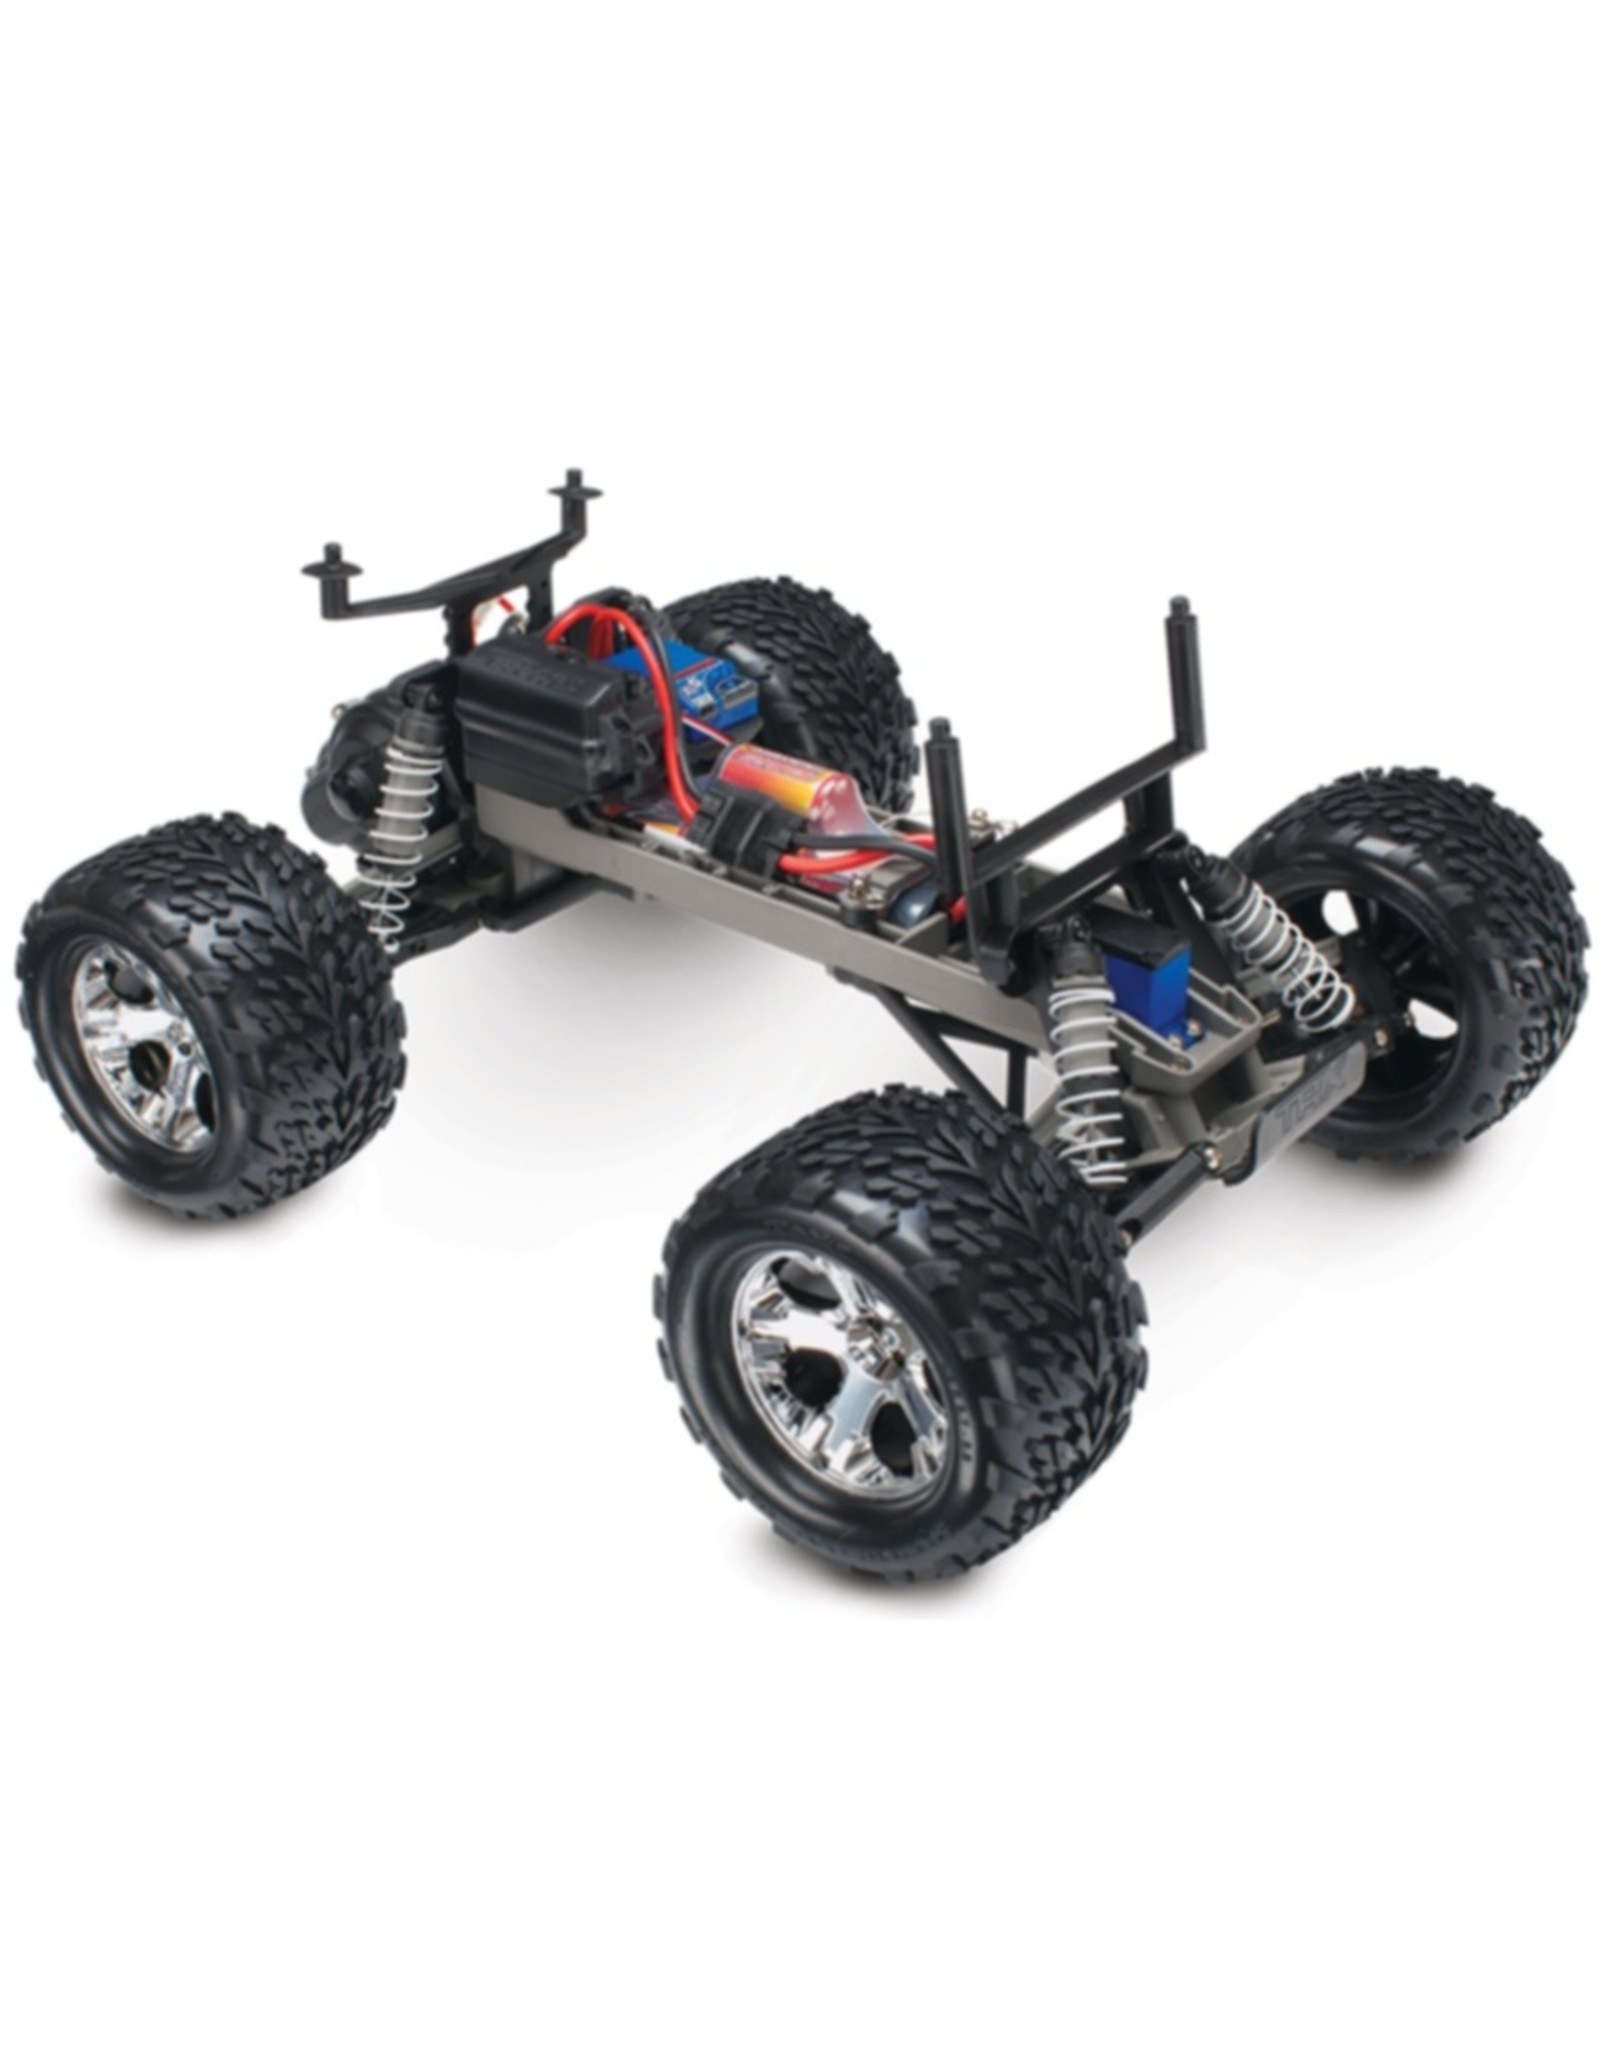 Traxxas TRA36054-1 ORANGE Stampede : 1/10 Scale Monster Truck with TQ 2.4GHz radio system